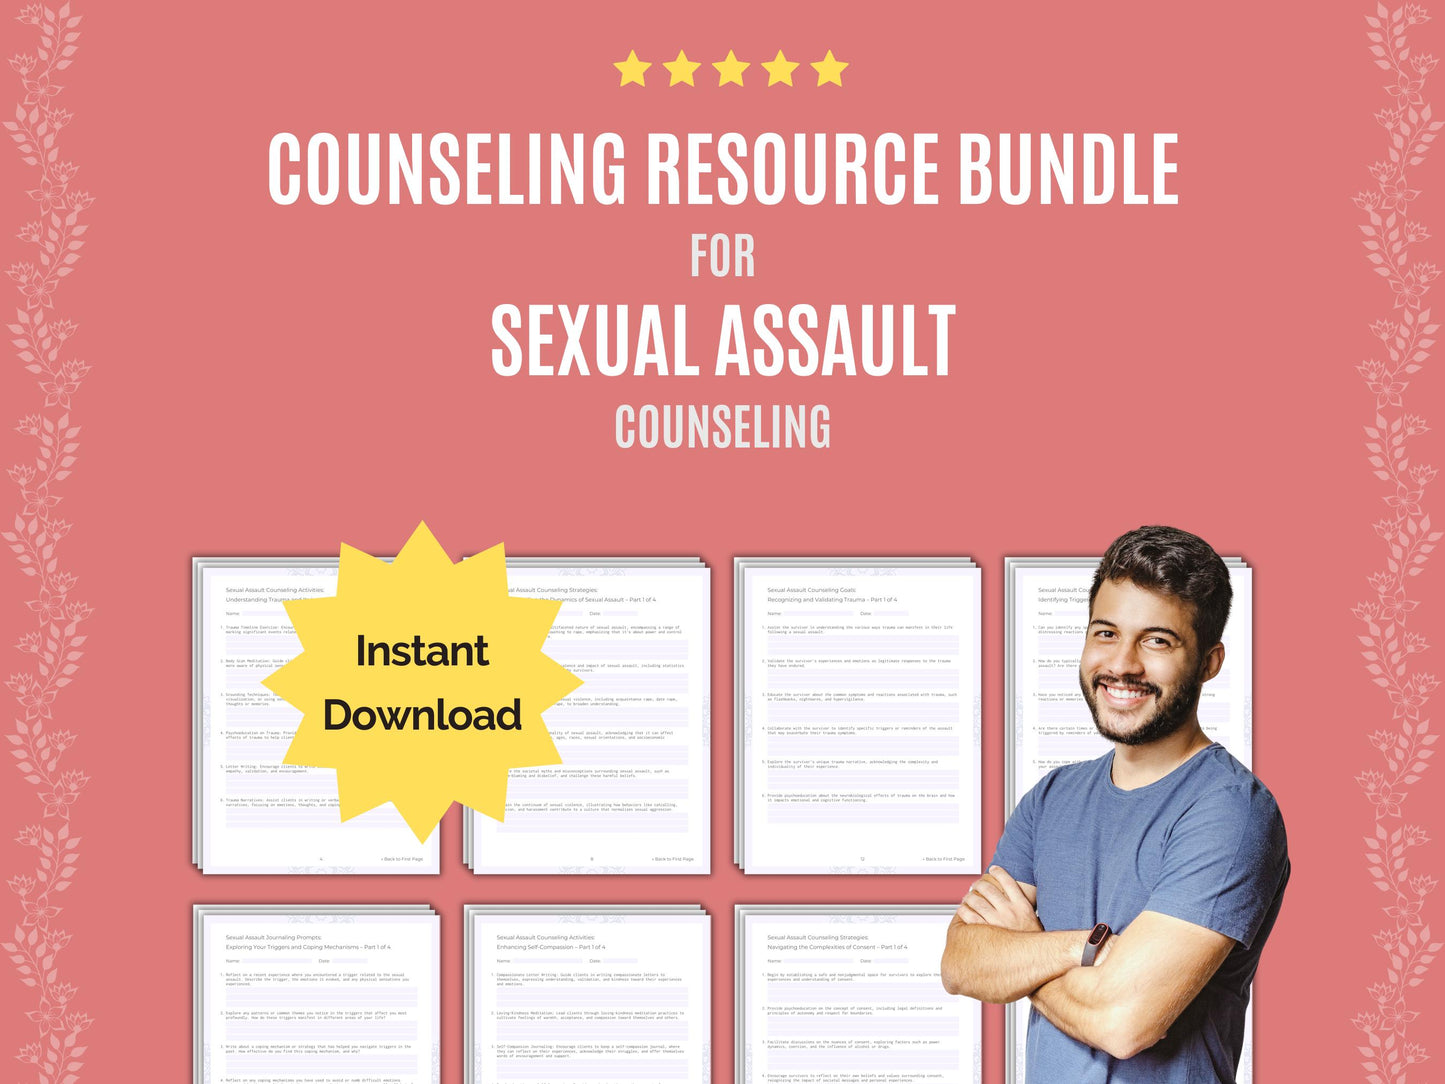 Therapist, Sexual Assault Tool, Content, Counselor, Resource, Counseling, Workbook, Sexual Assault, Mental Health, Therapy, Template, Worksheet, Sexual Assault Idea